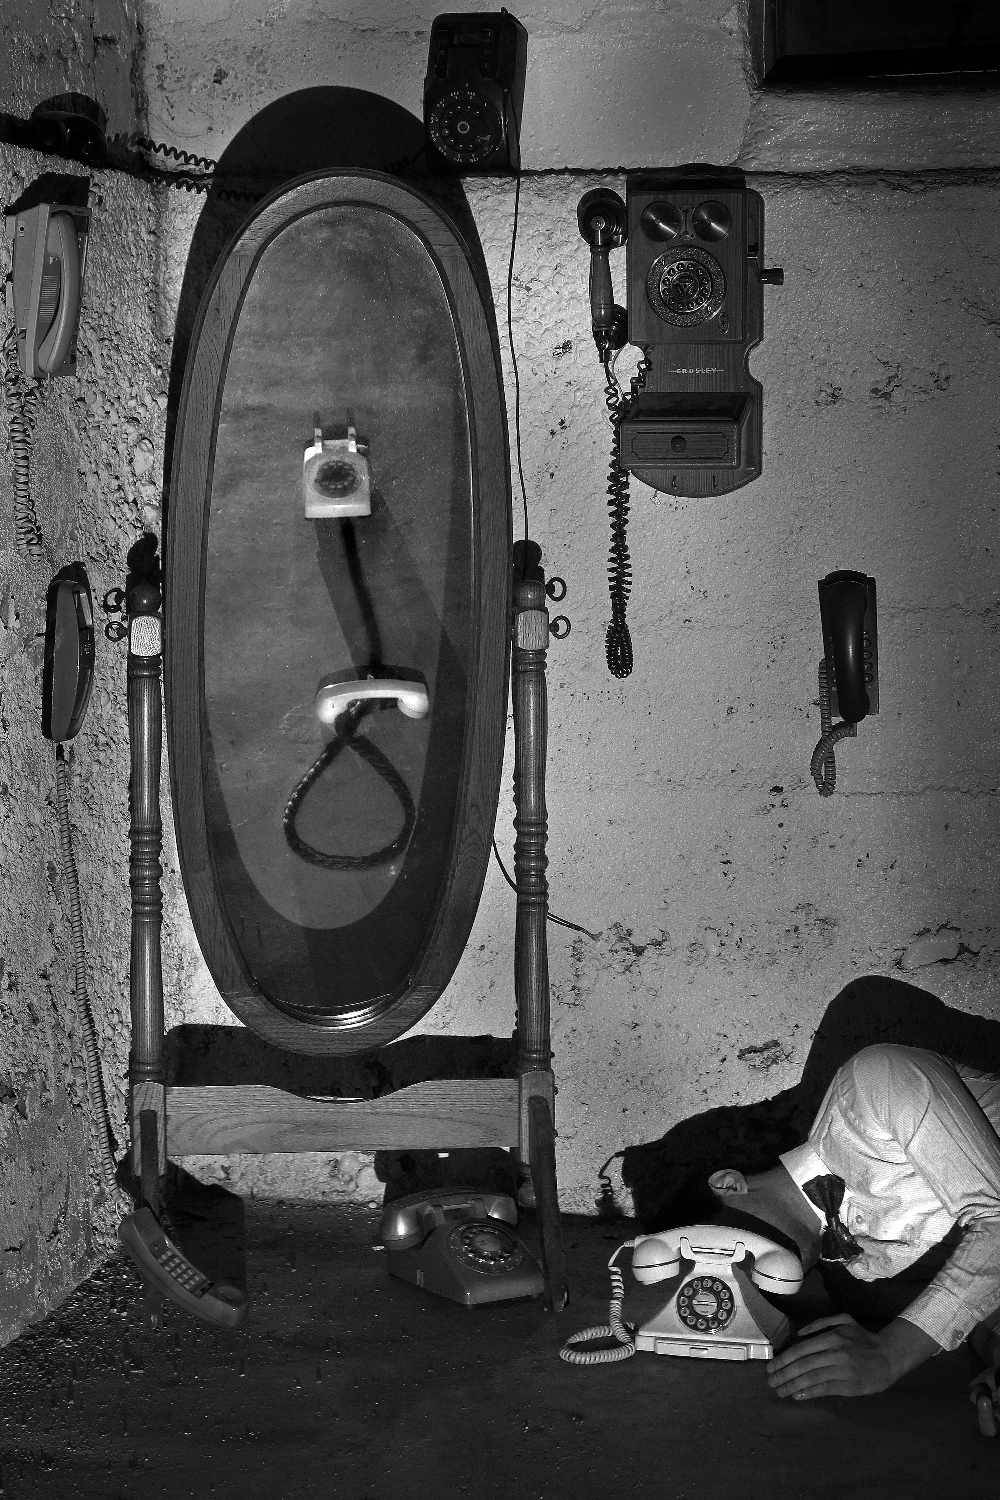 antique telephones and collapsed figure in black and white photo